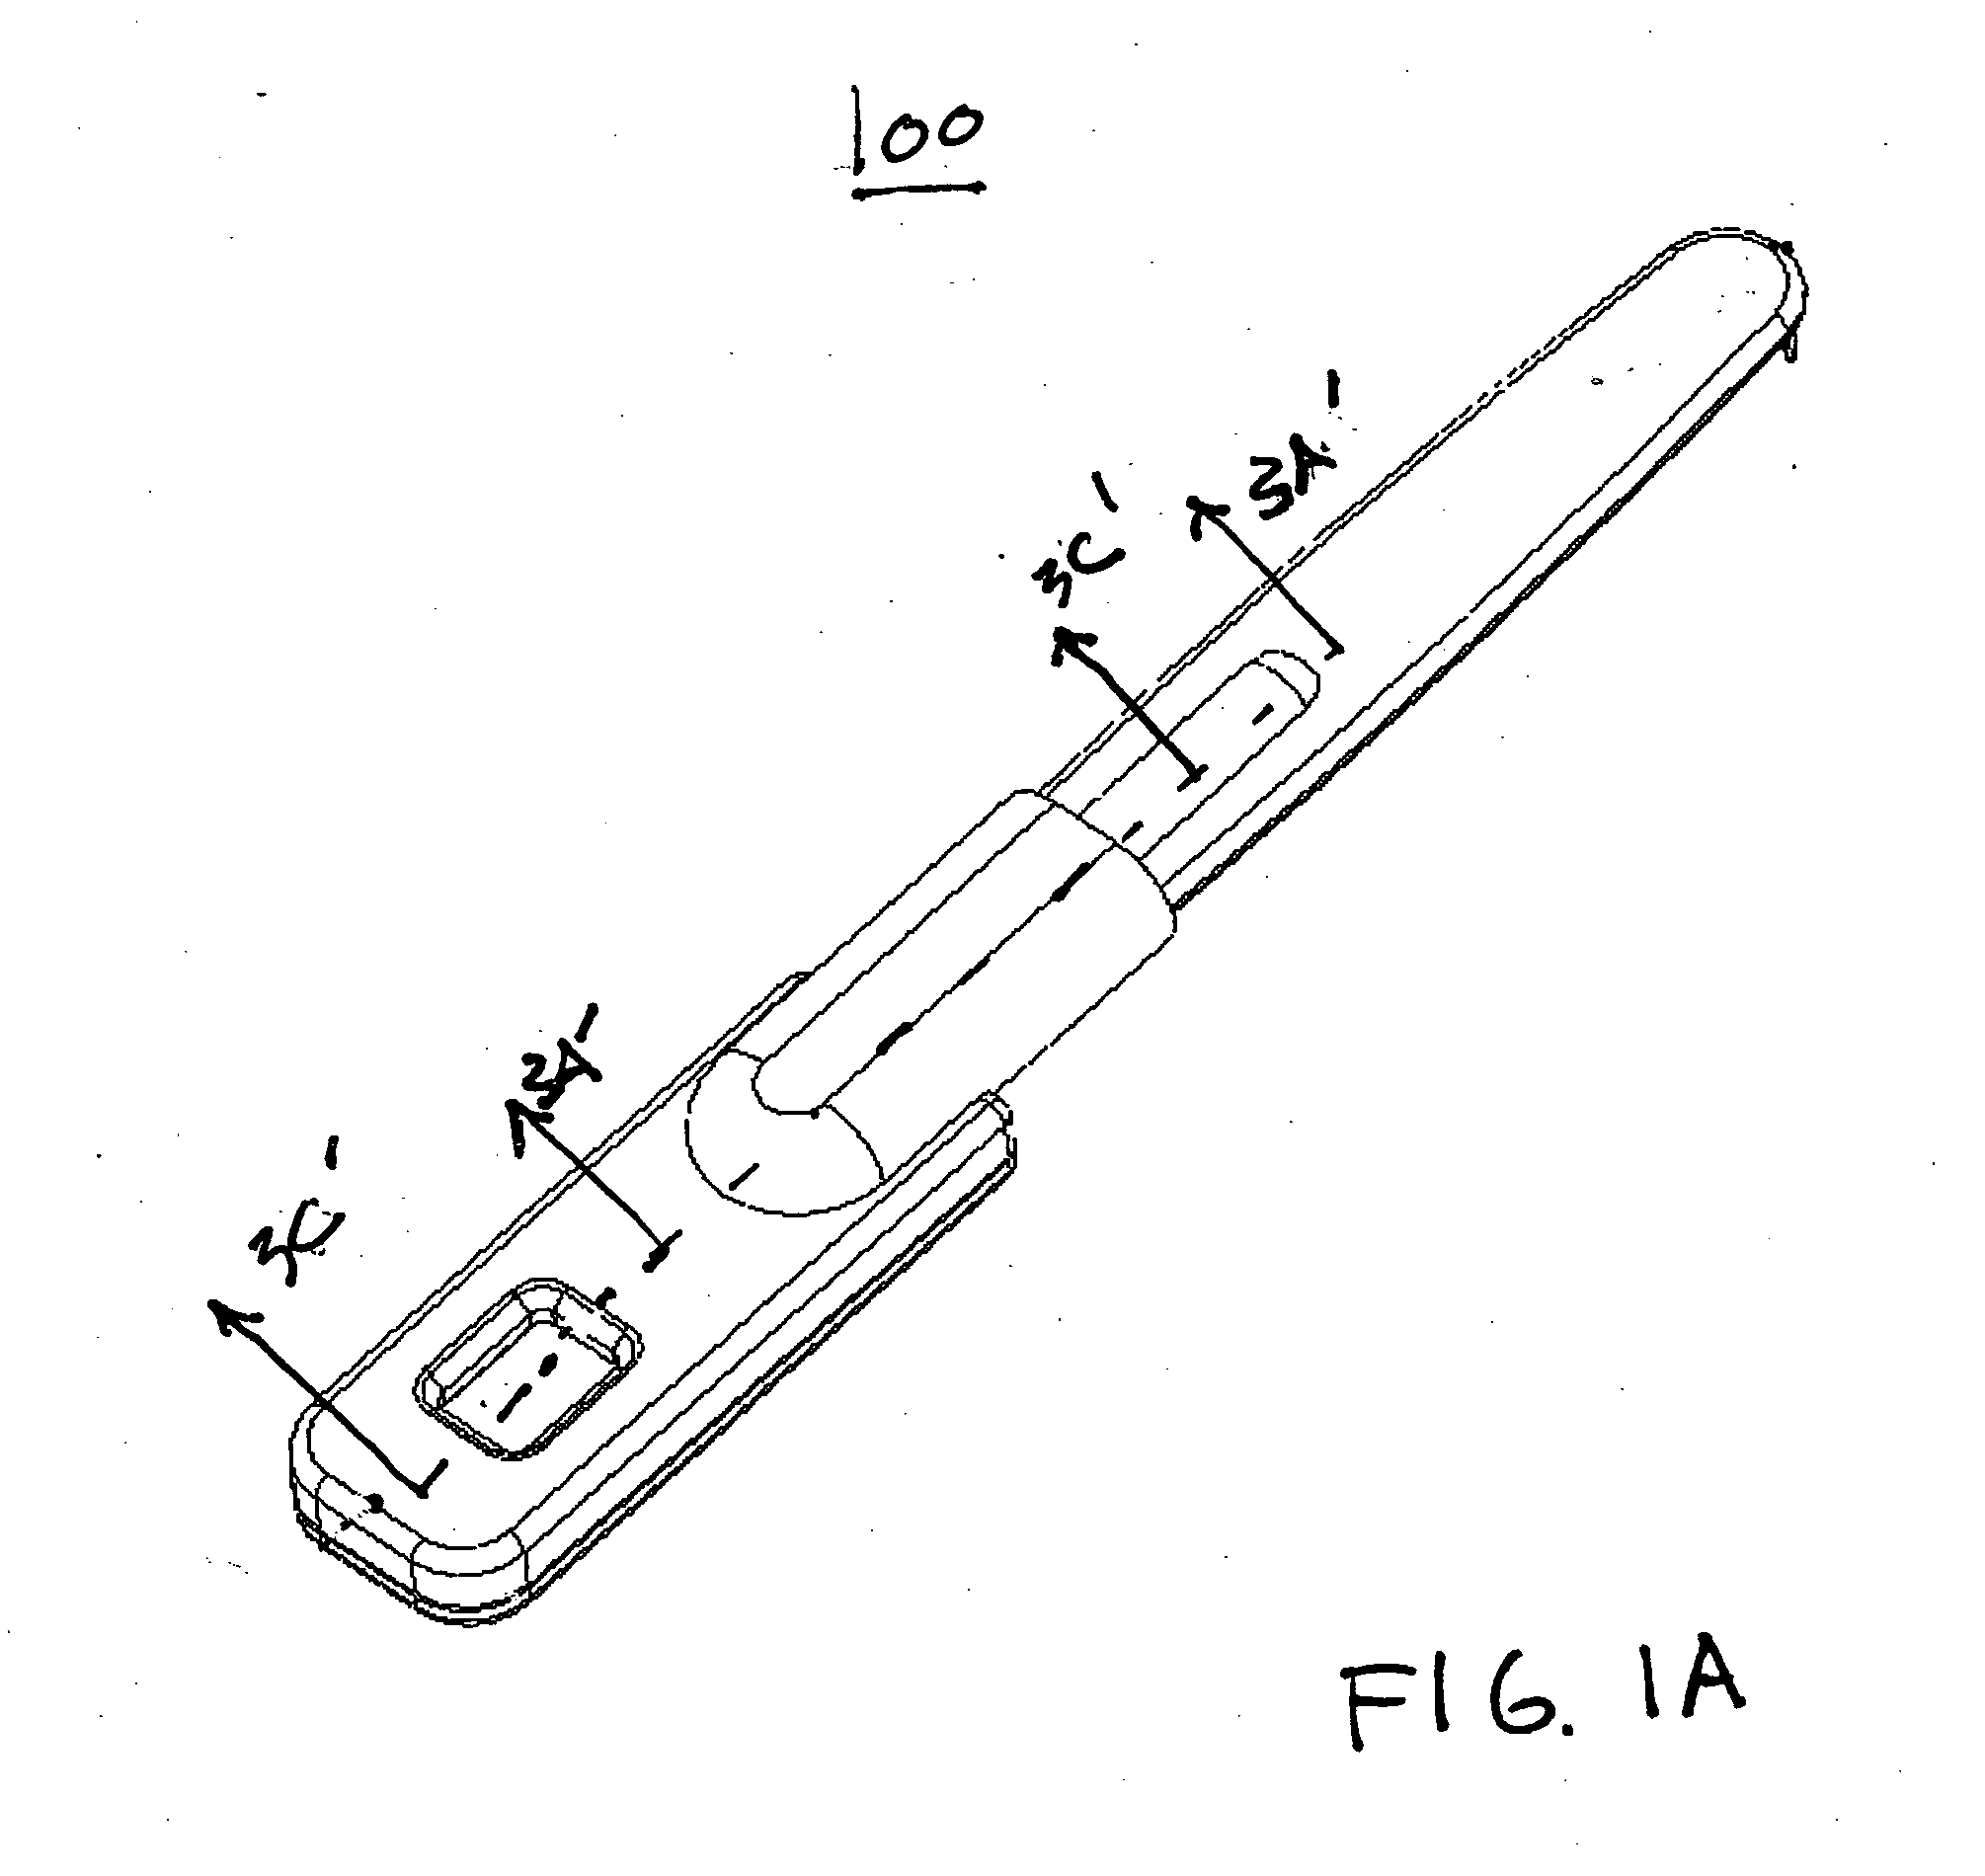 Sampling device and method for the rapid detection of specific molds, allergens, viruses, fungi, bacteria and other protein containing substances